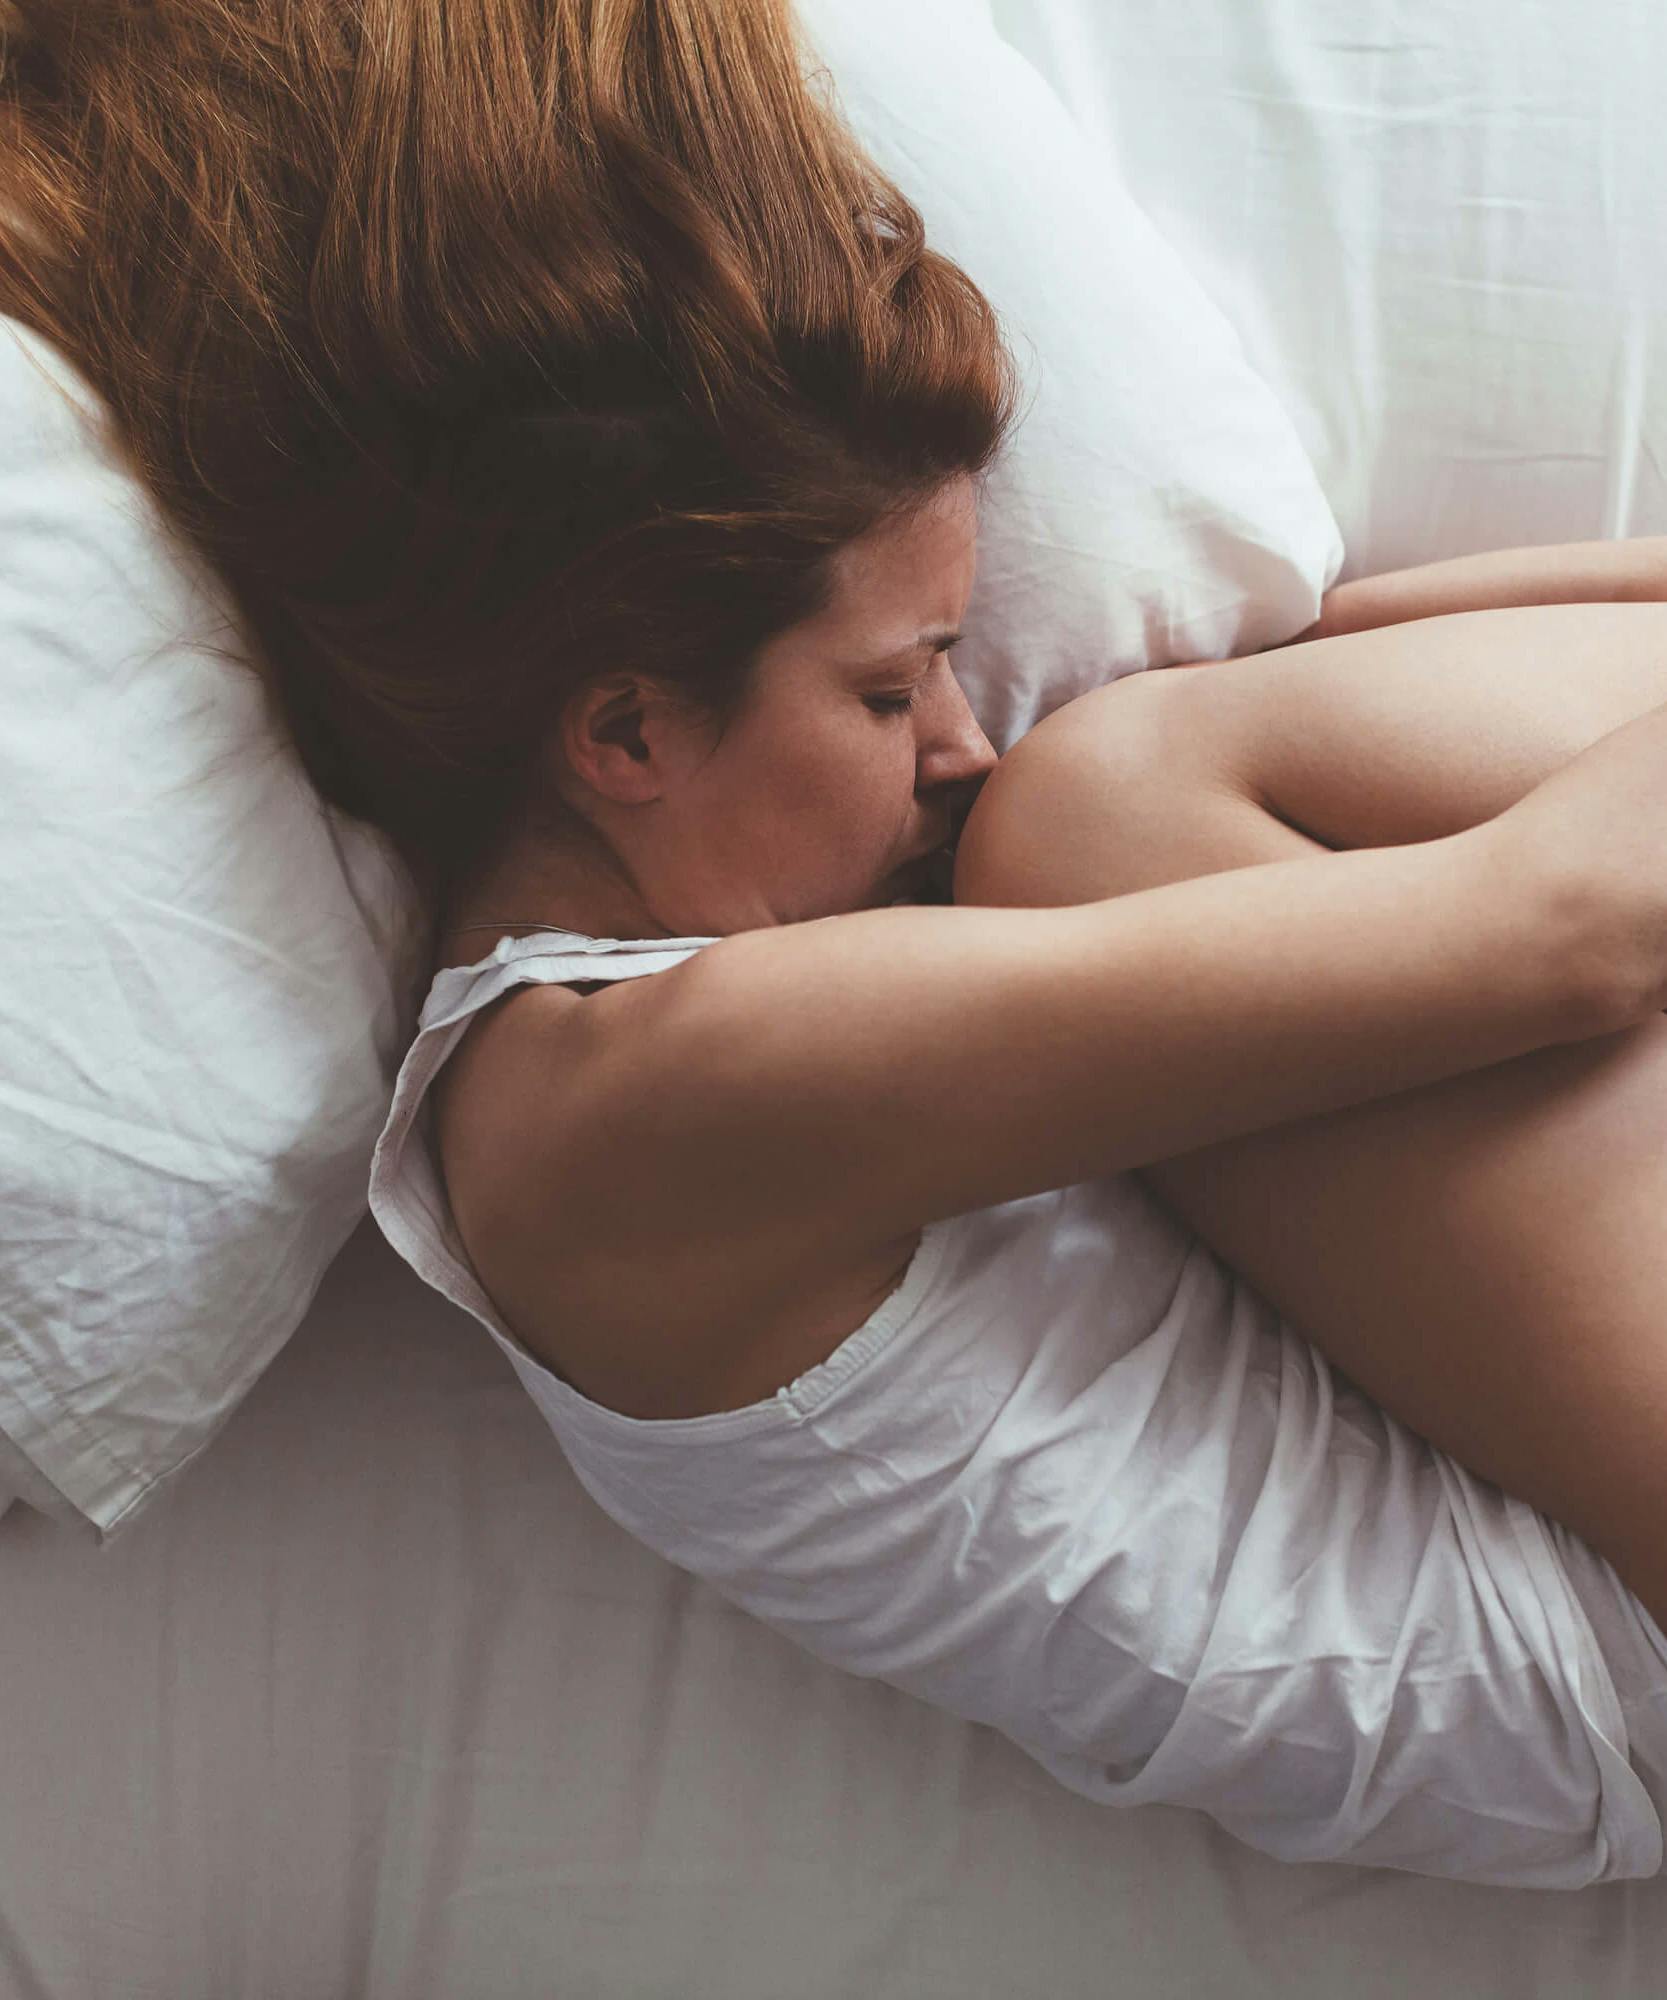 Can You Really Eliminate Painful Cramps During PMS Without Advil Or Hormonal Birth Control?